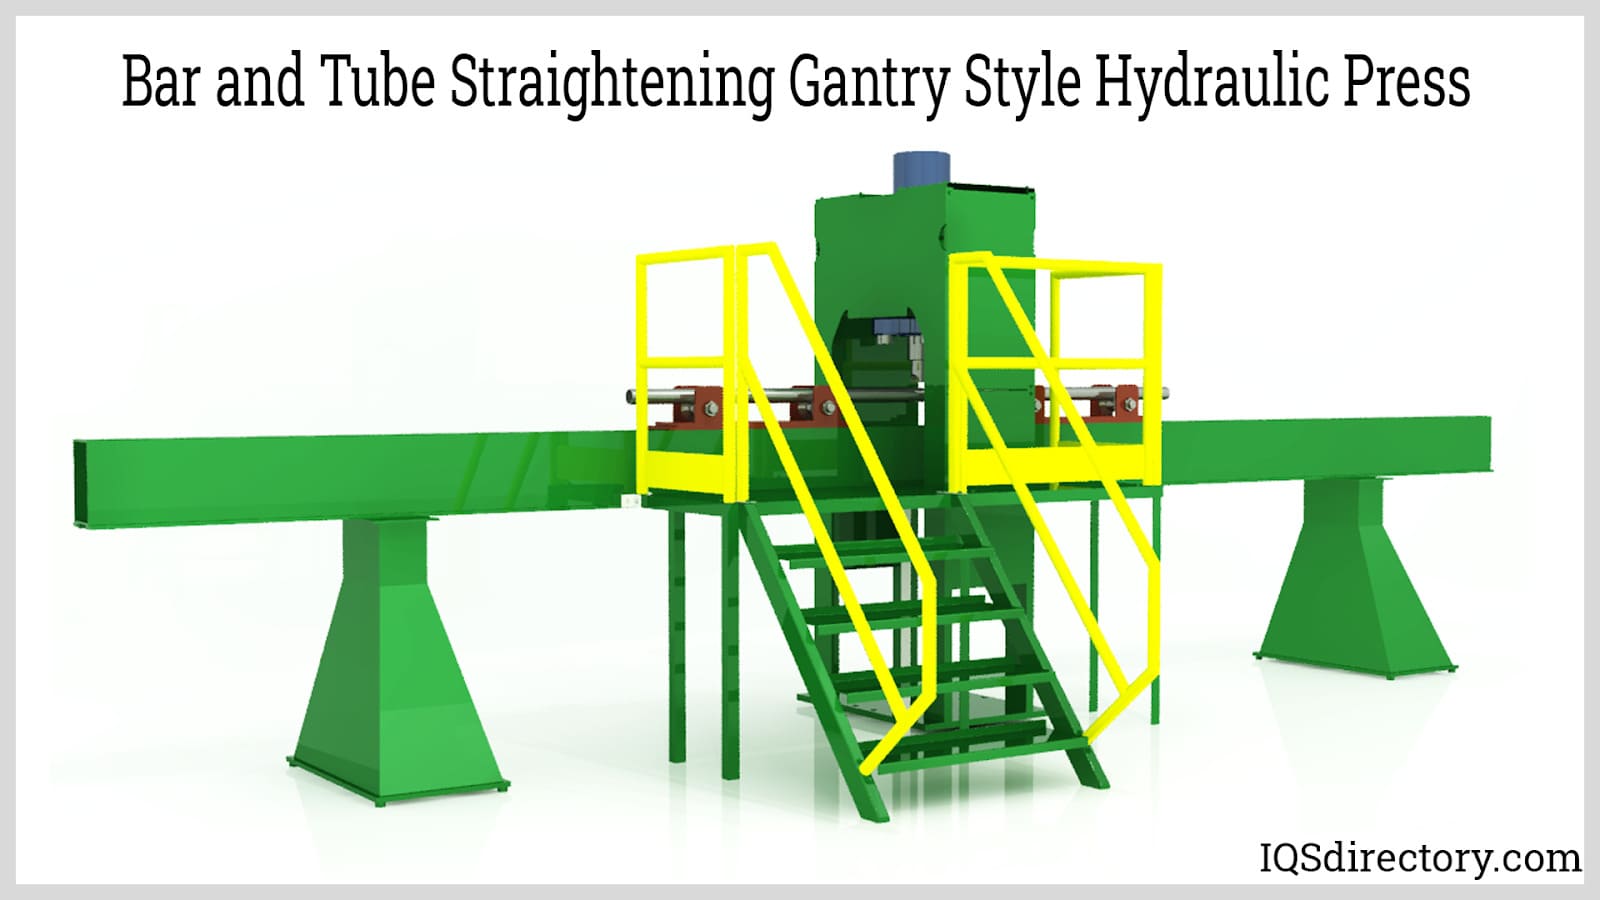 Hydraulic Press: What Is It? How Is It Used? Types Of